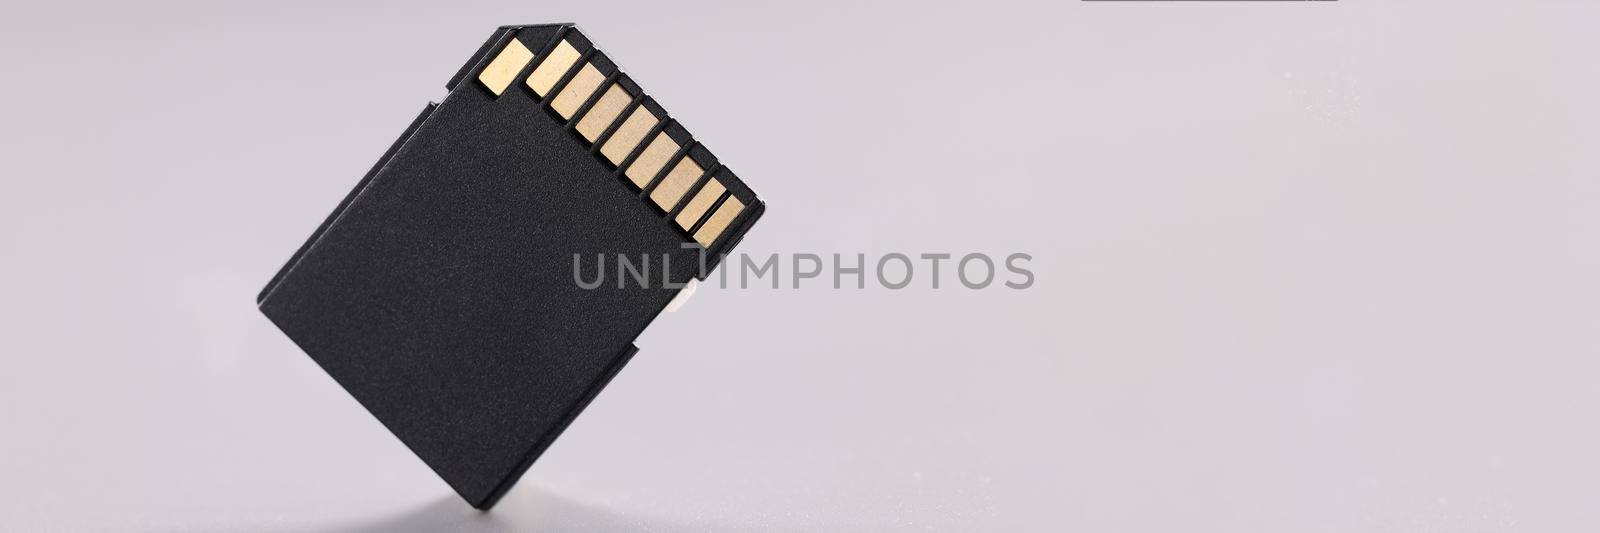 High quality black sd memory card with small gold disc on gray background. Small portable electronic memory card concept